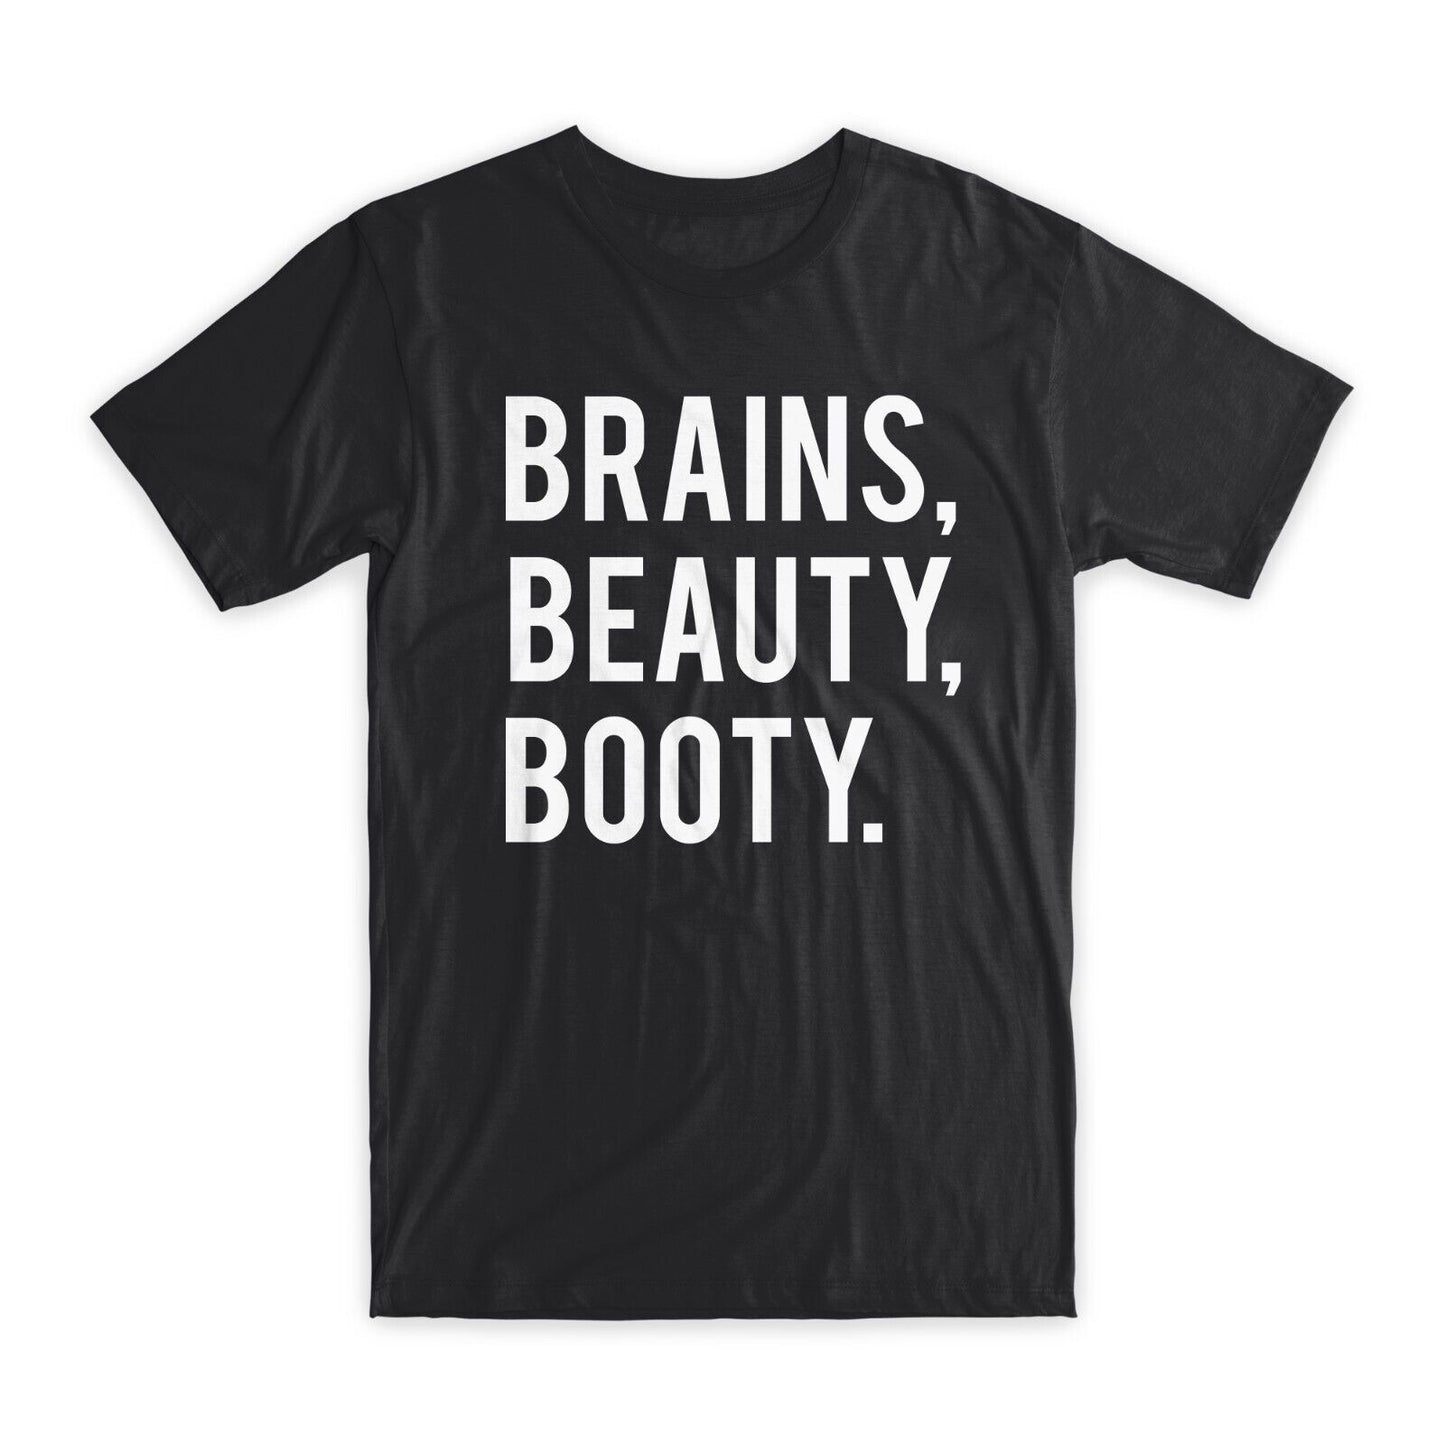 Brains Beauty Booty T-Shirt Premium Soft Cotton Crew Neck Funny Tees Gifts NEW